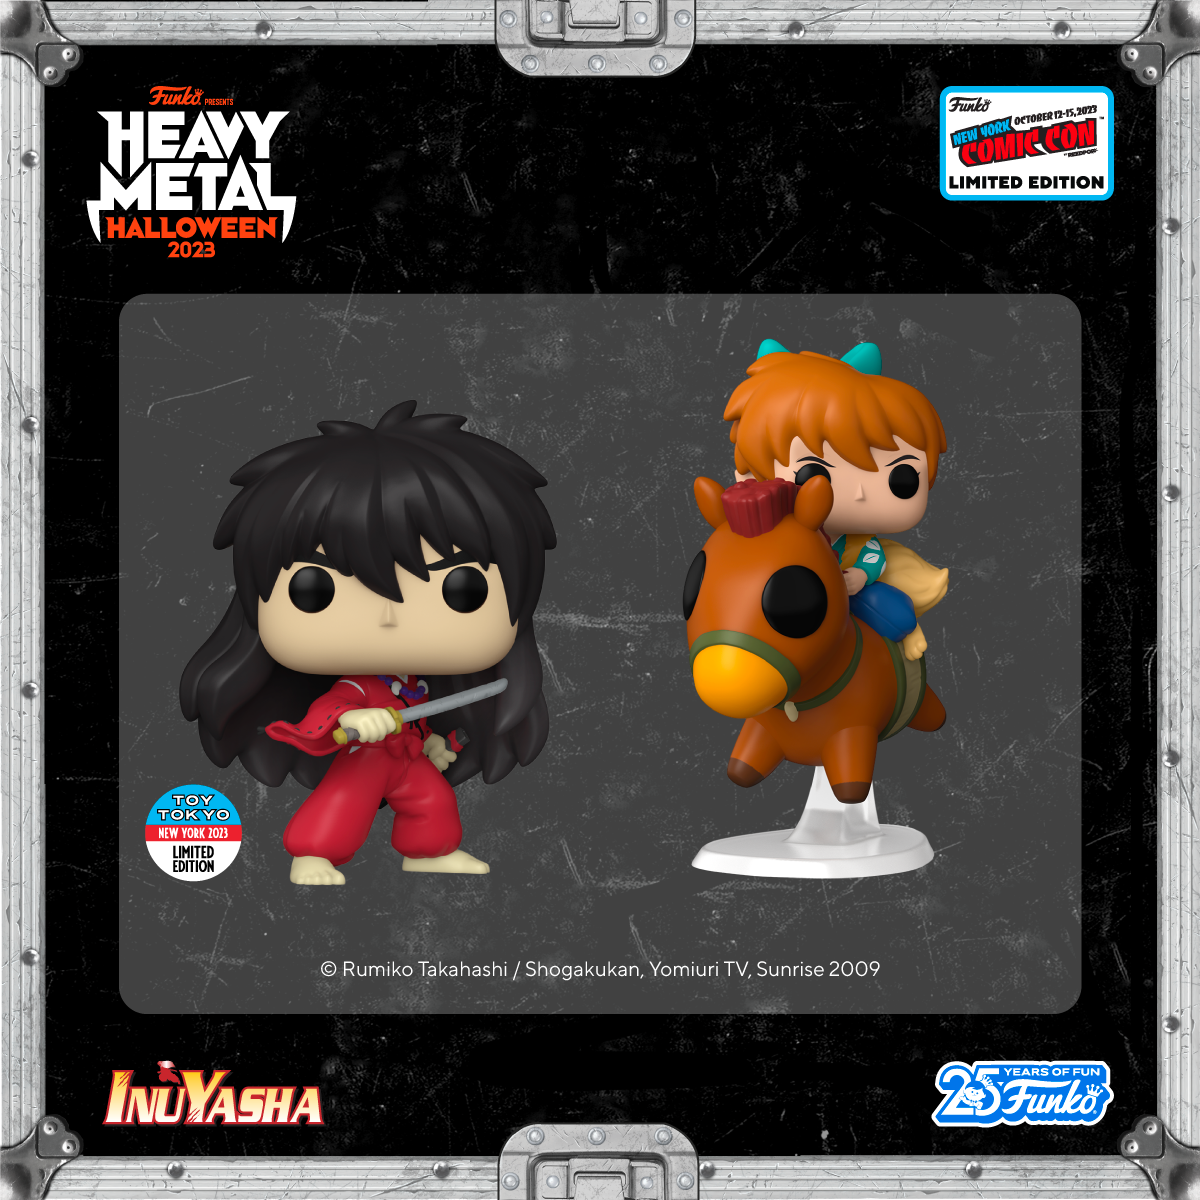 New York Comic Con 2023 Pop! Inuyasha with sword drawn and Pop! Shippo On Horse to complete your Inuyasha collection.